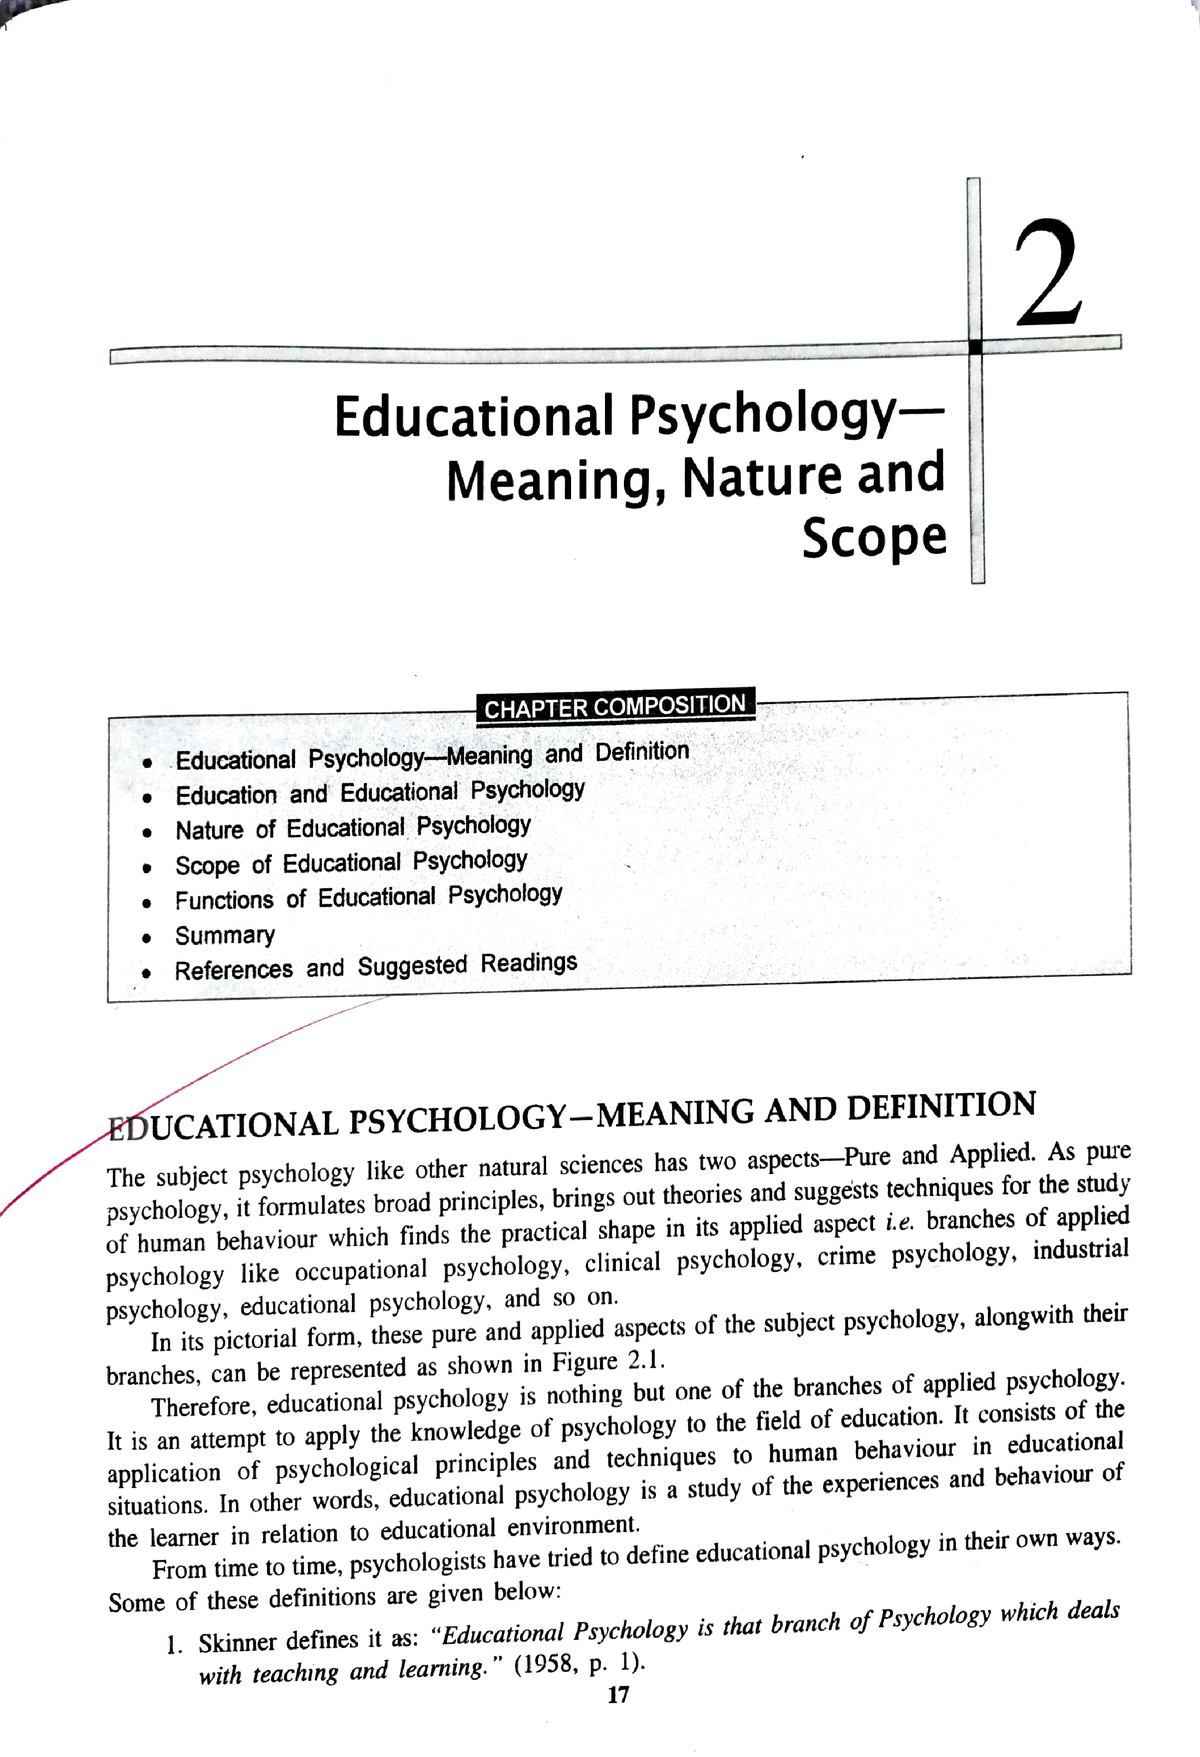 thesis in educational psychology